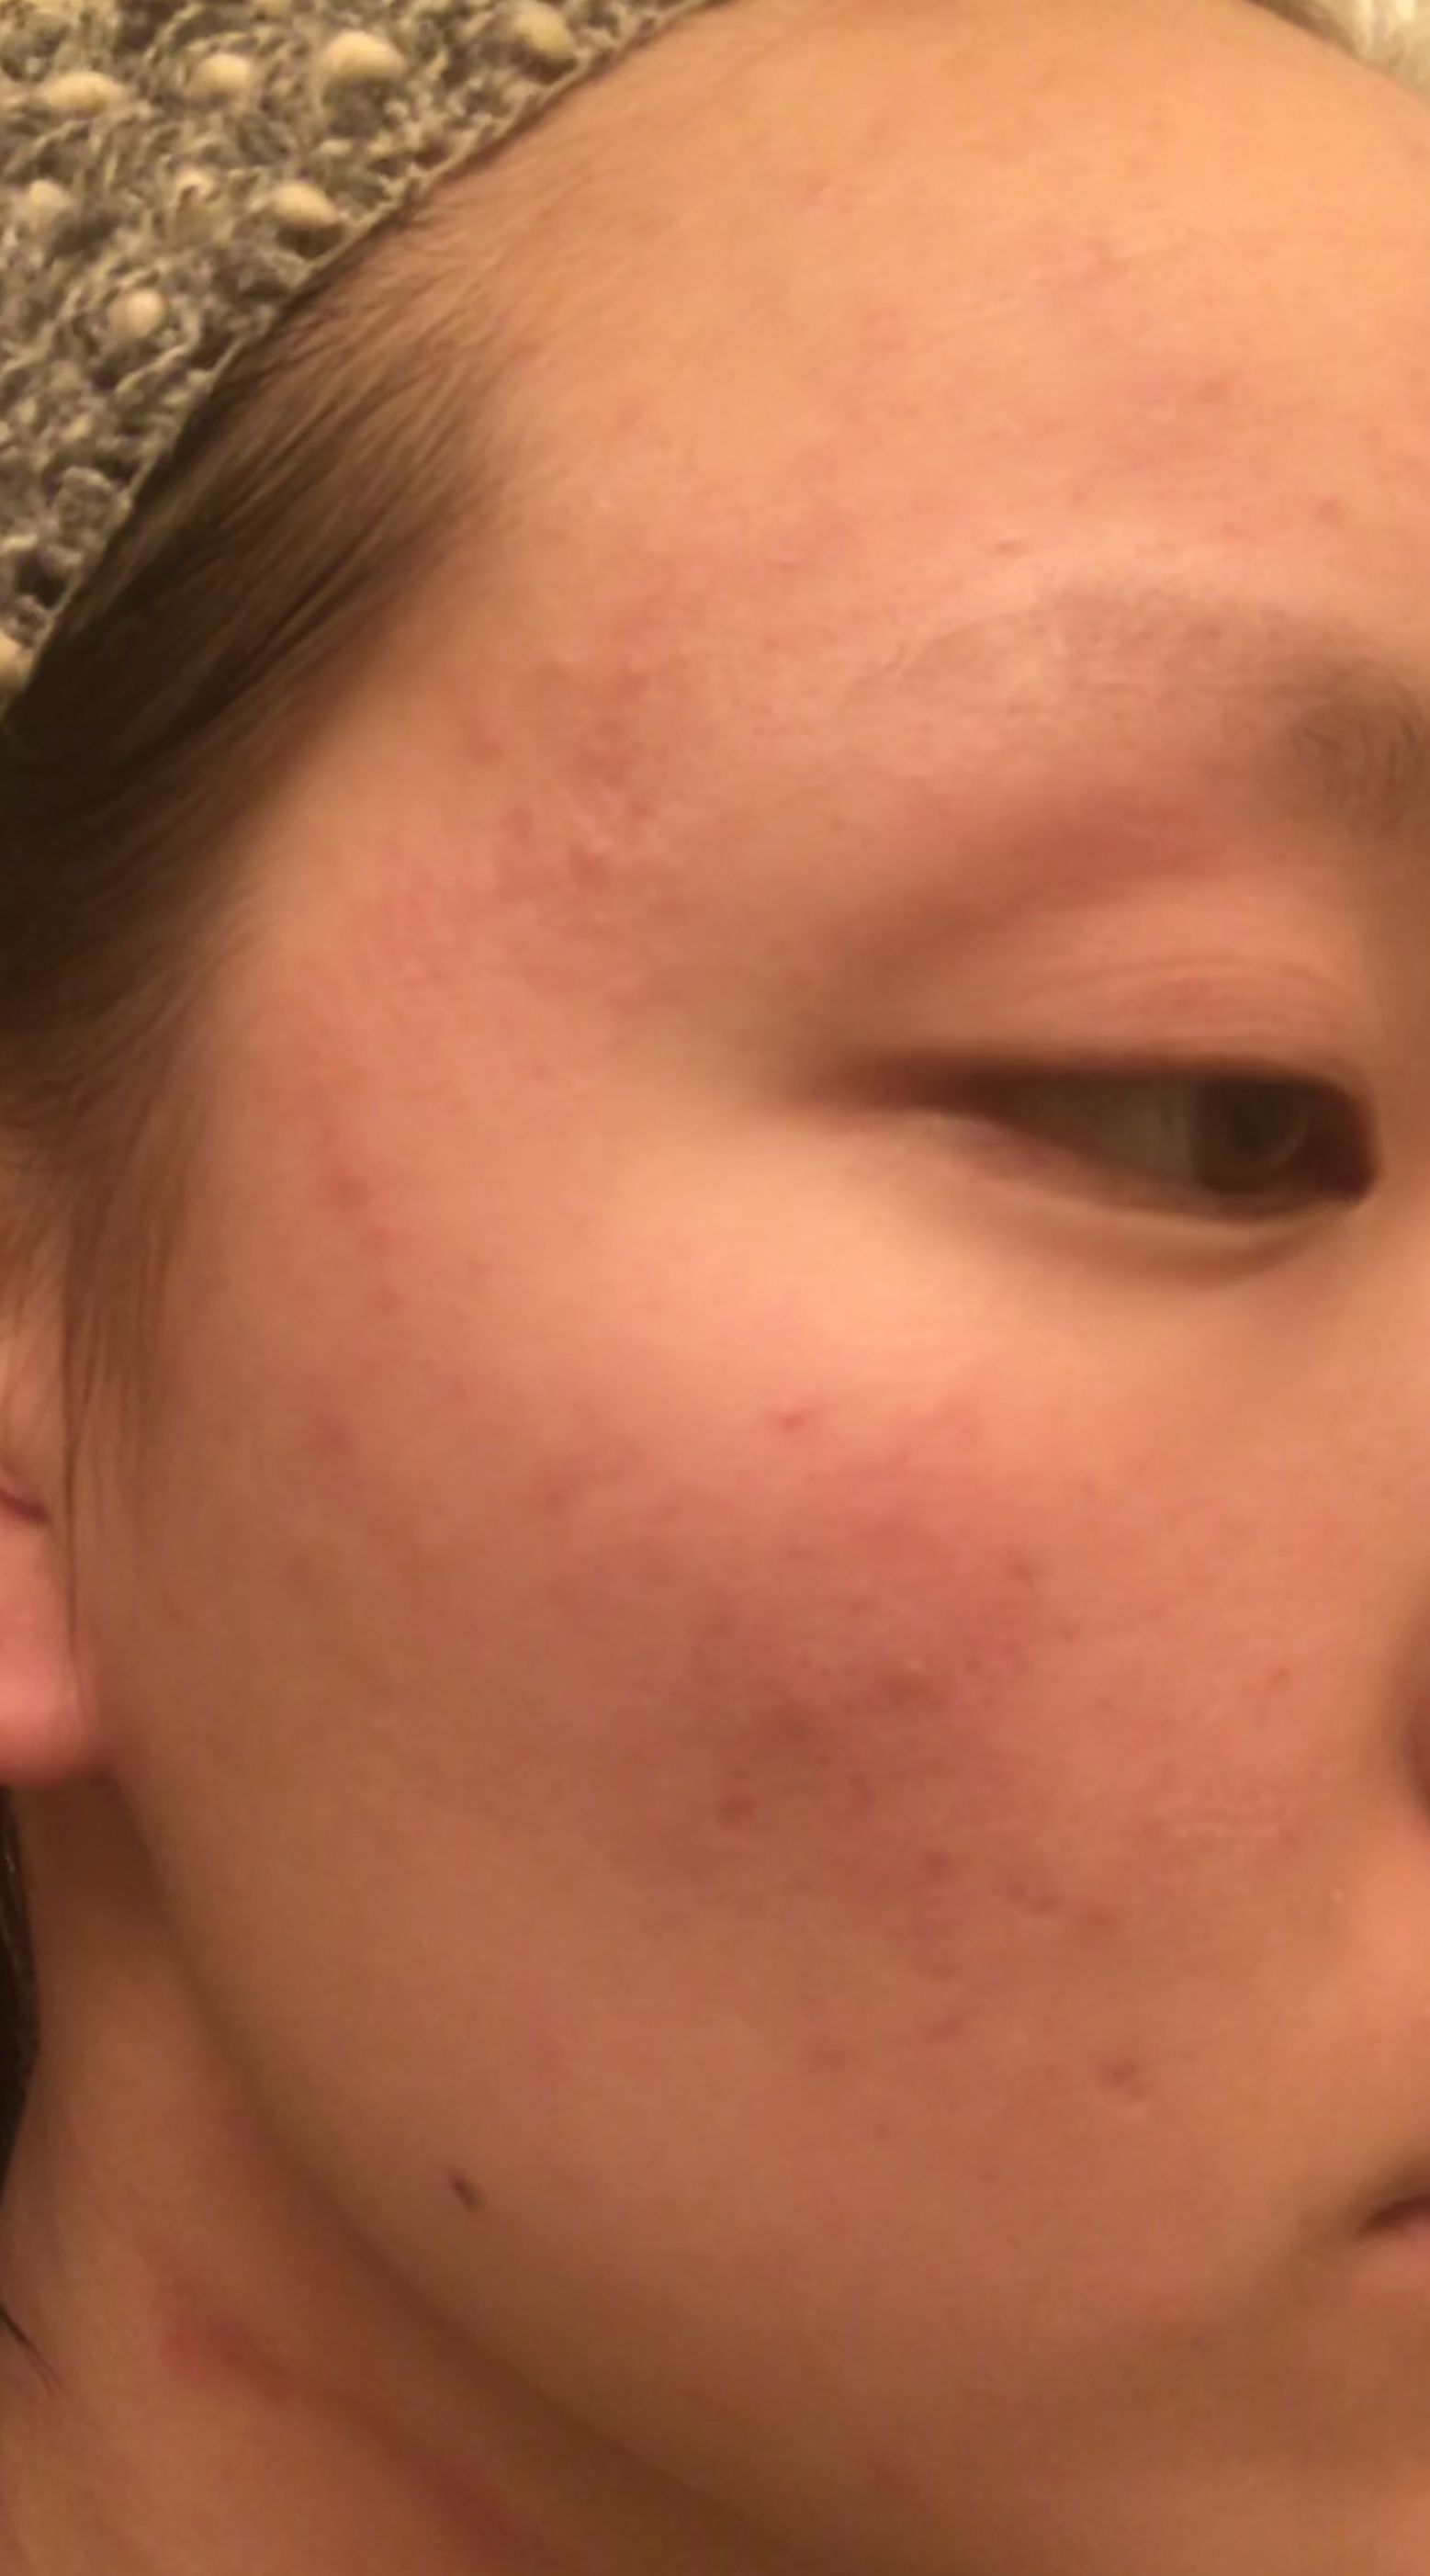 Red Itchy Bumpy Rash On Face General Acne Discussion Acne Org